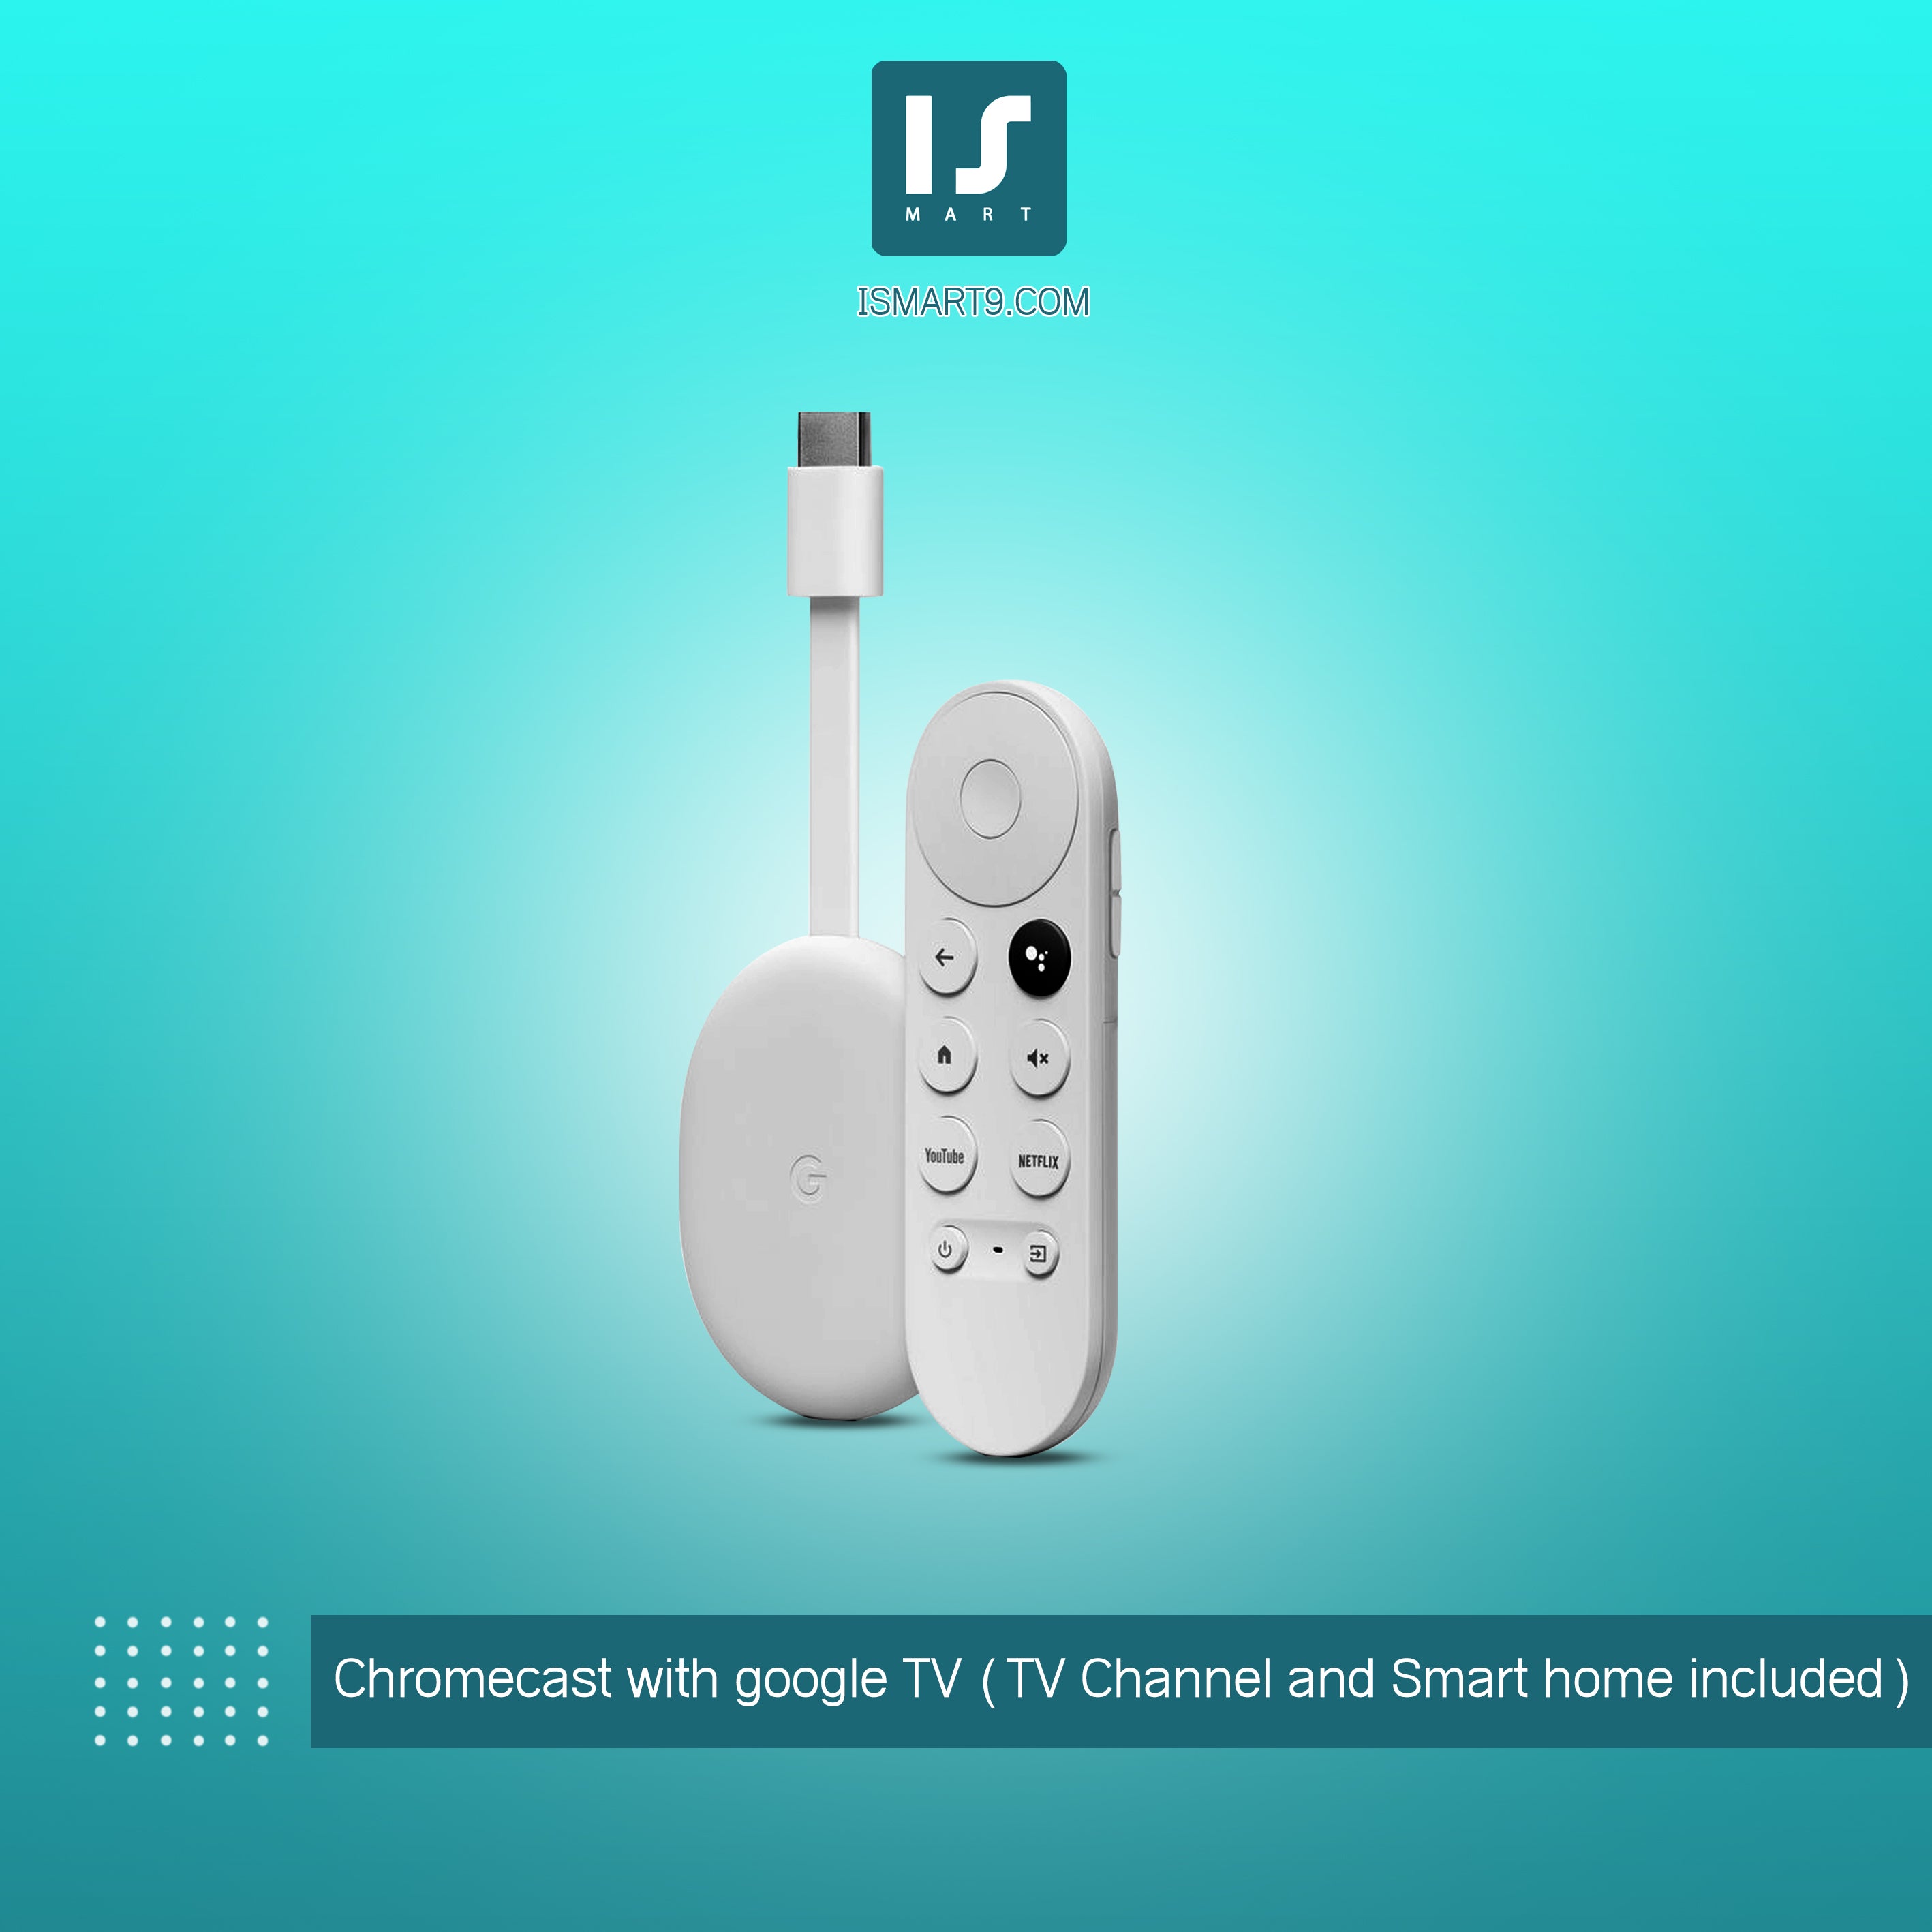 Chromecast with google TV (TV Channel and Smart home included)